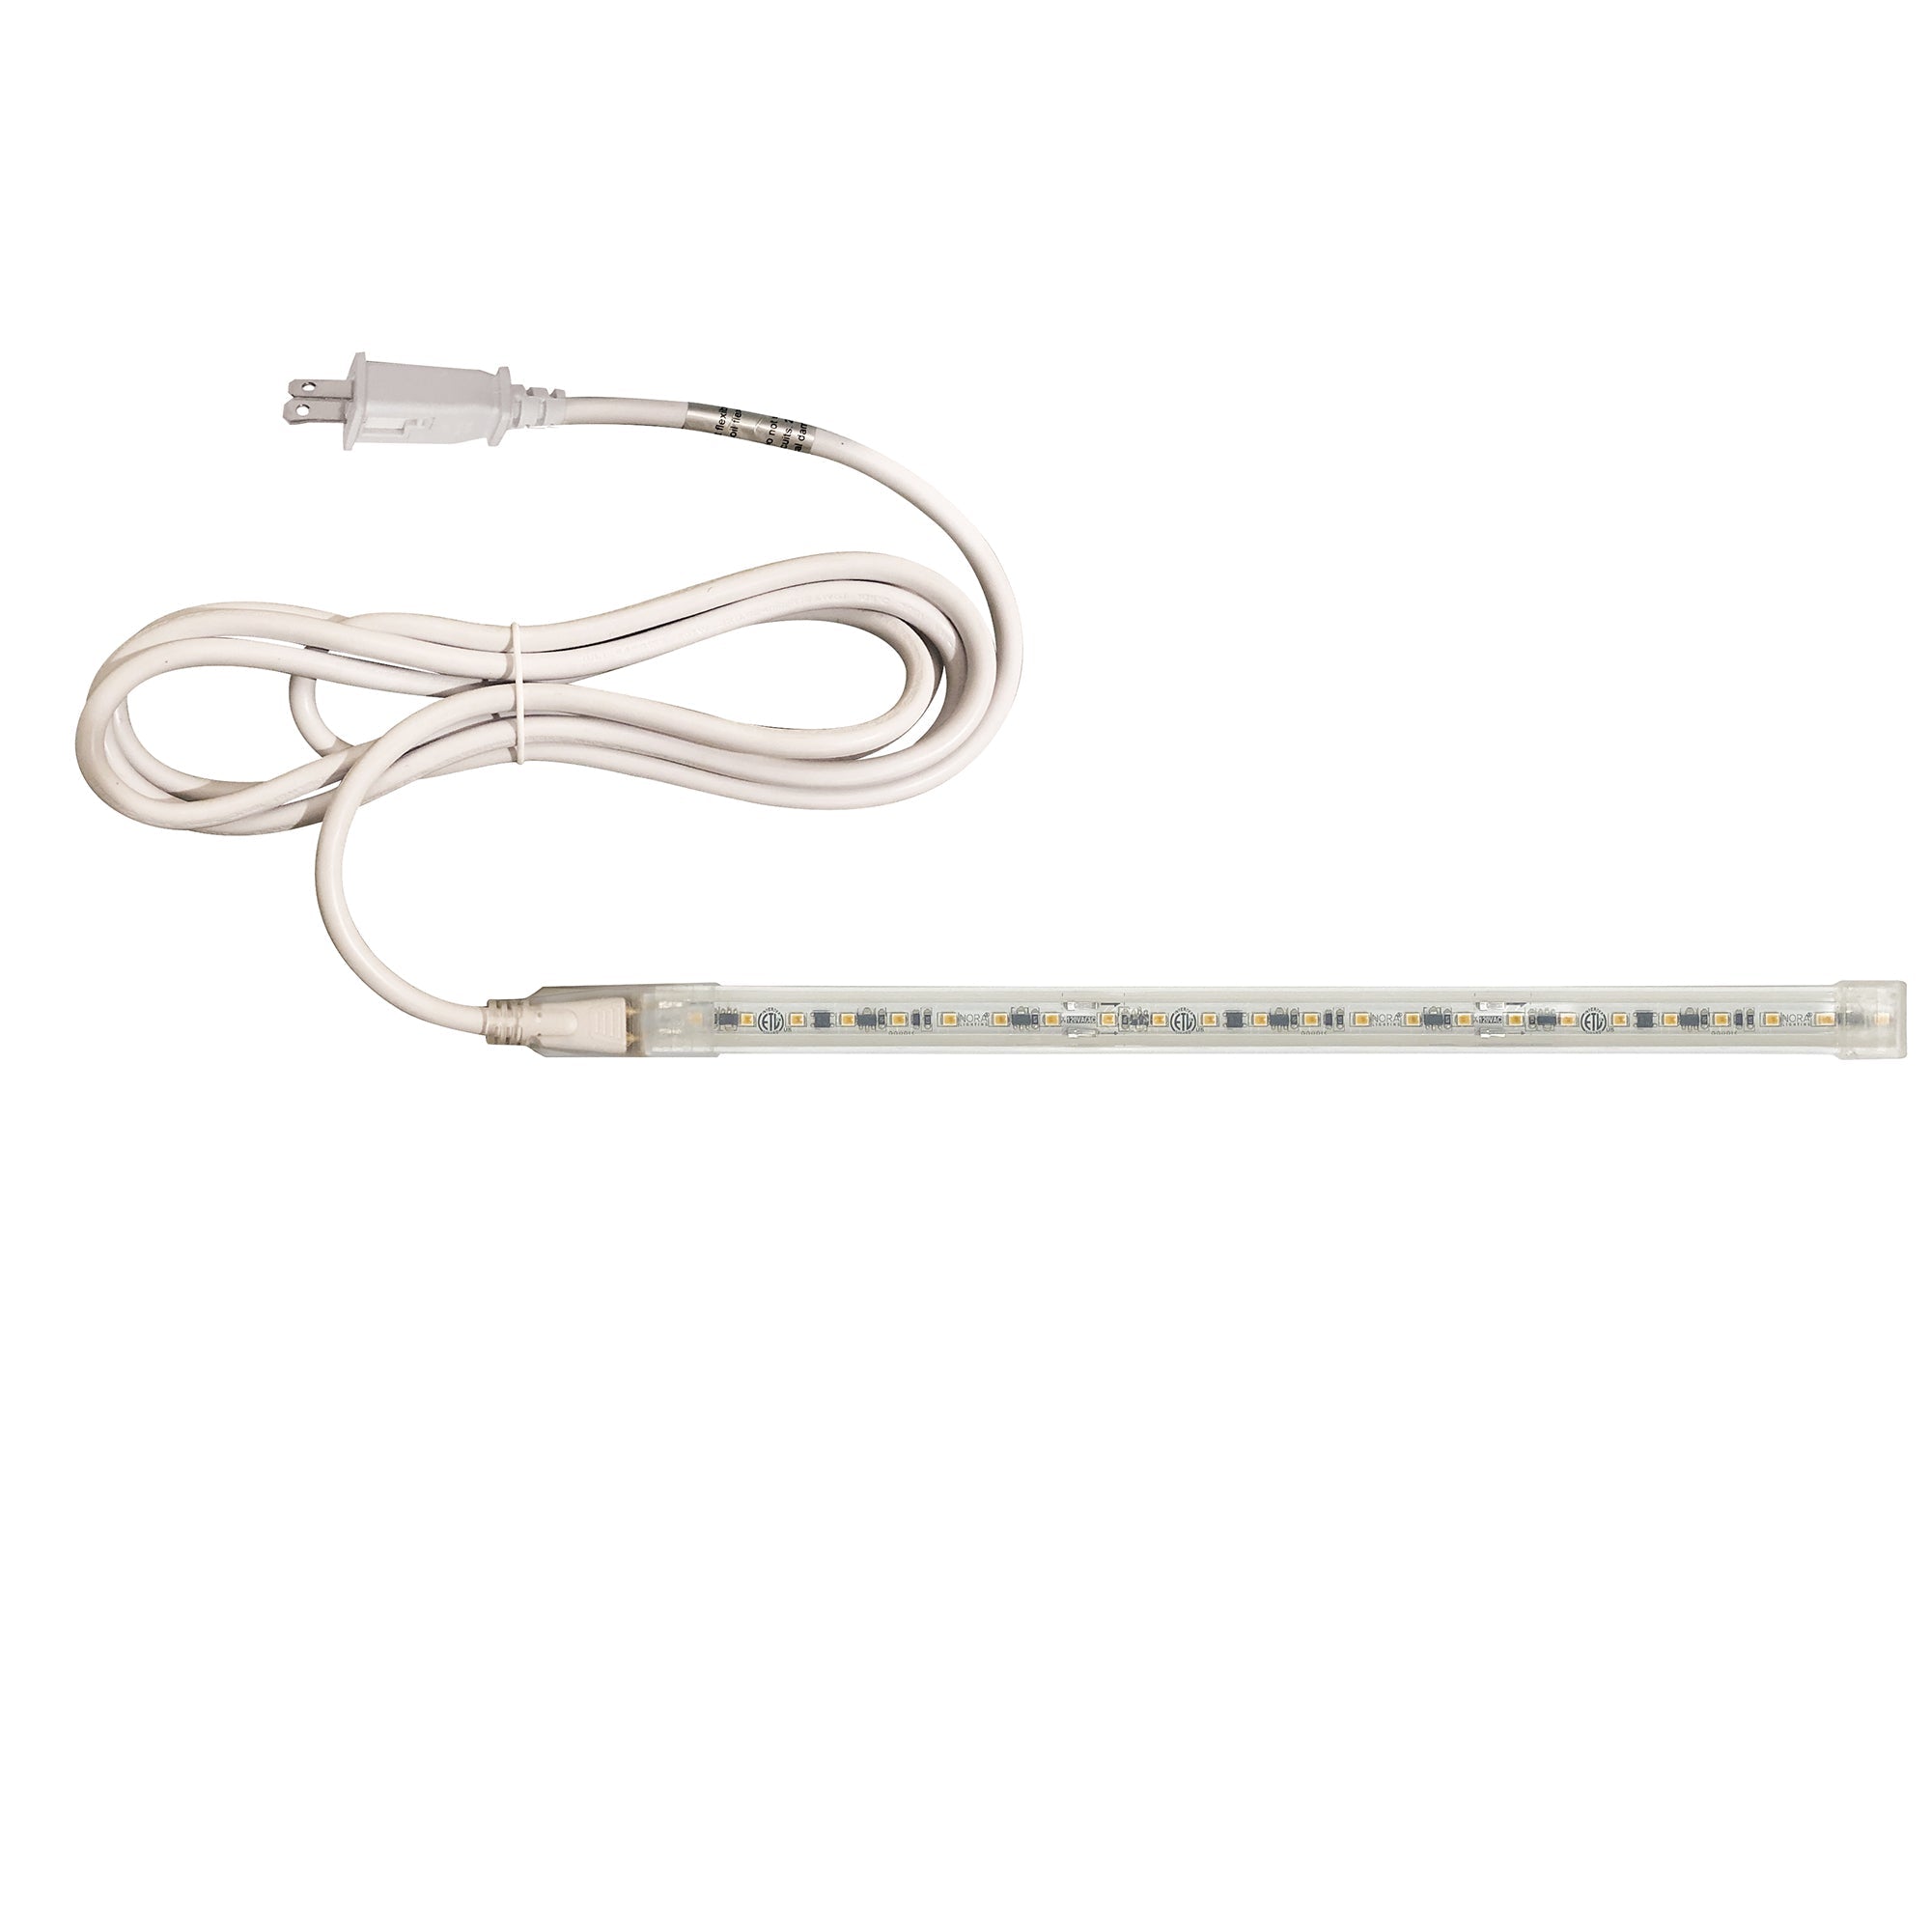 Nora Lighting NUTP13-W44-12-930/CP - Accent / Undercabinet - Custom Cut 44-ft 120V Continuous LED Tape Light, 330lm / 3.6W per foot, 3000K, w/ Mounting Clips and 8' Cord & Plug